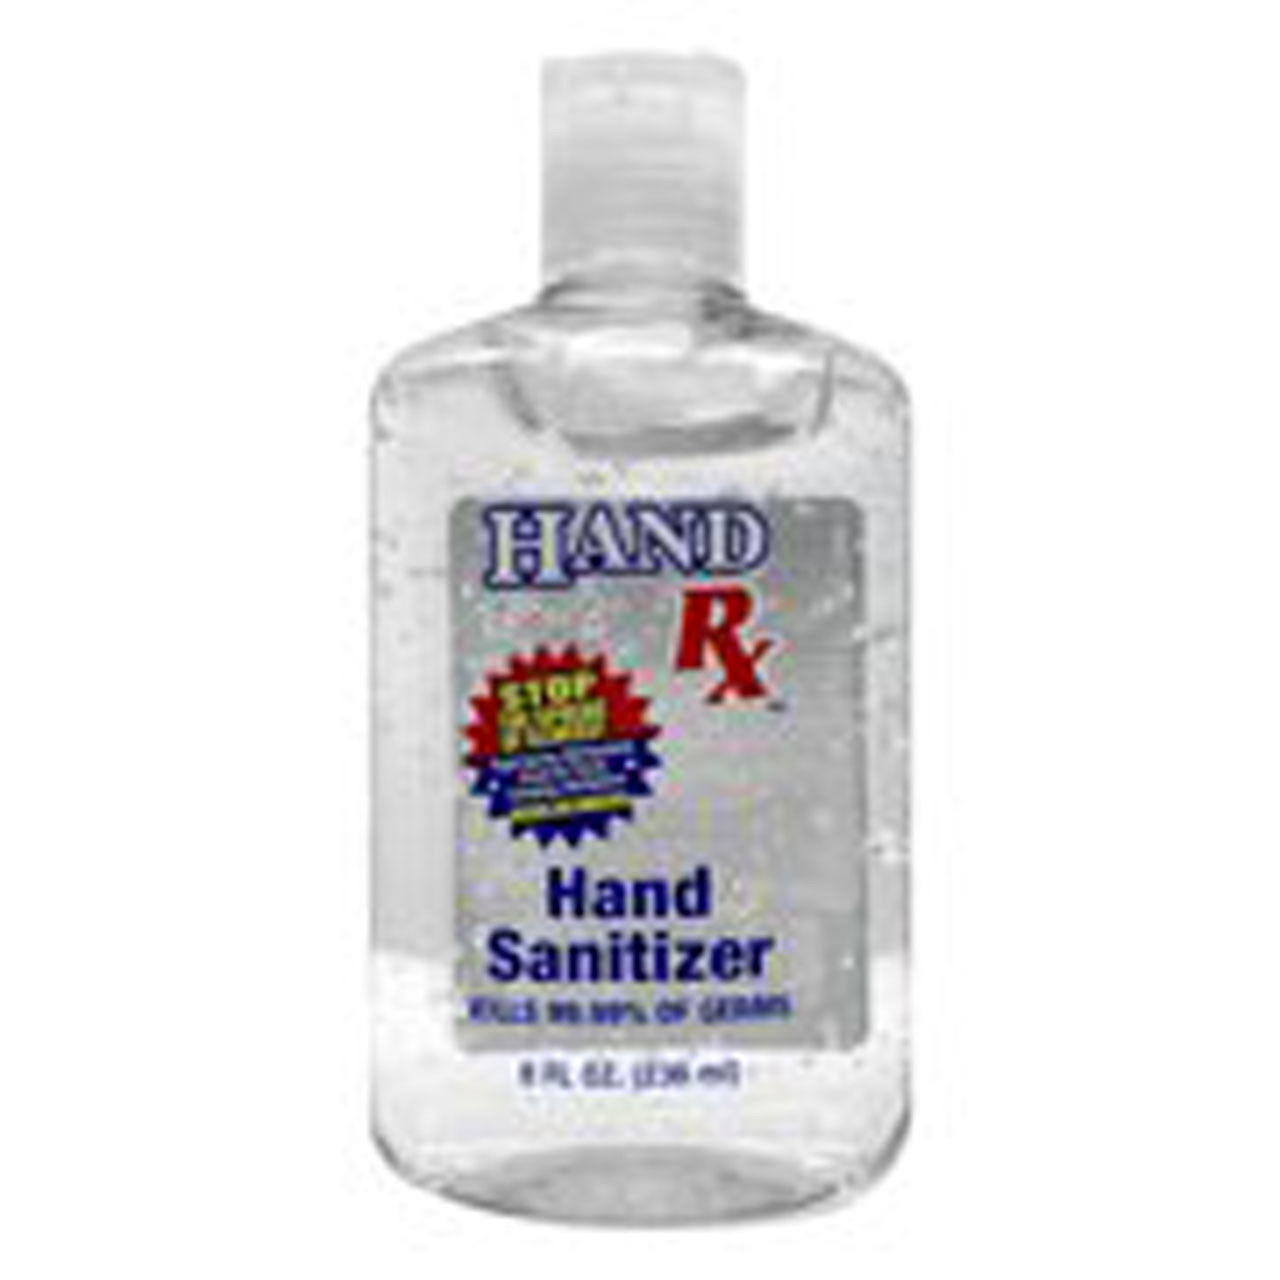 What is the application method for the 8oz Hand Rx Hand Sanitizer Gel?